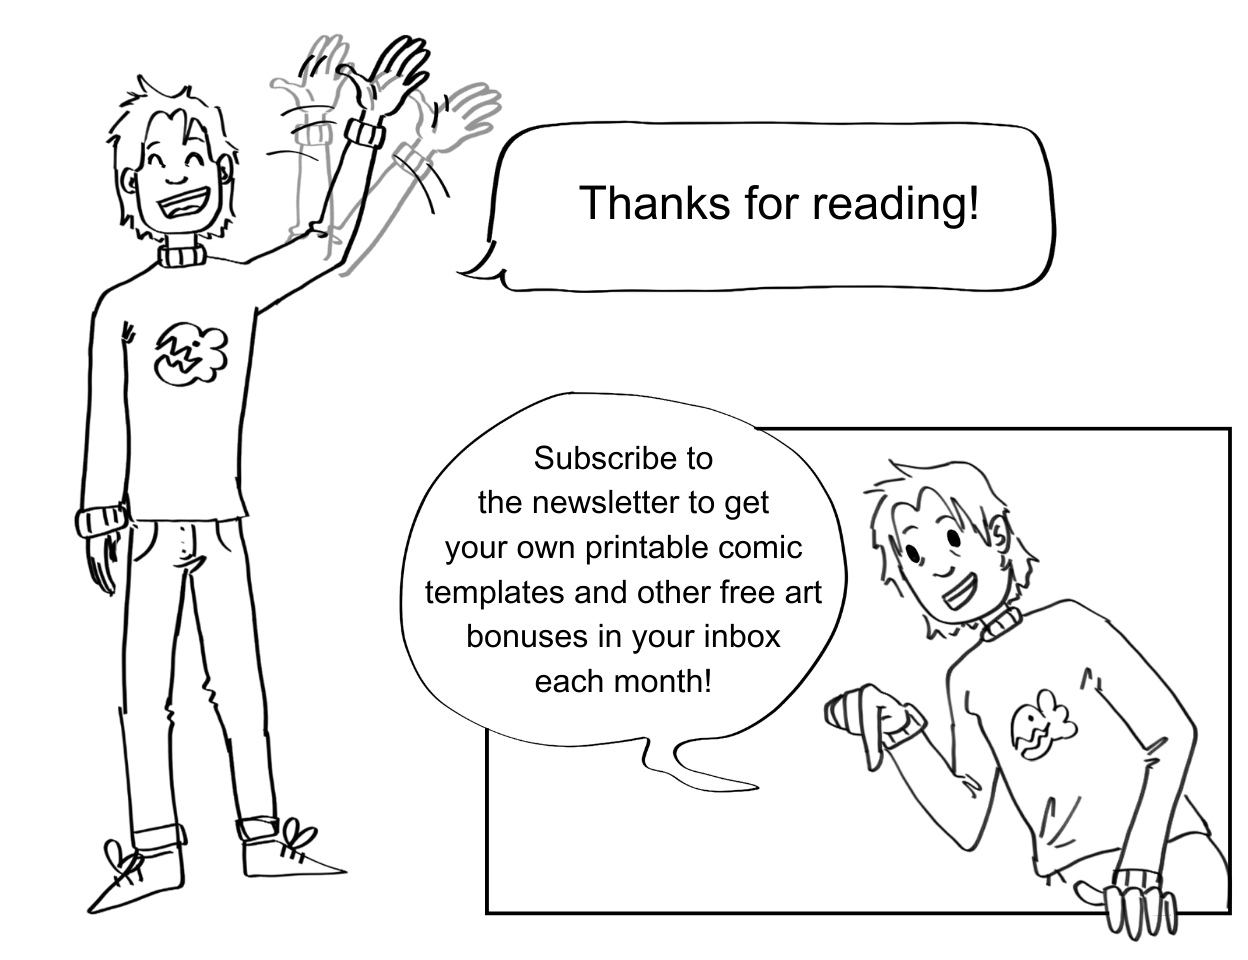 J. waves goodbye. "Thanks for reading!" In the next panel they point down towards the bottom of the webpage. "Subscribe to the newsletter to get your own printable comic templates and other free art bonuses in you inbox each month!"